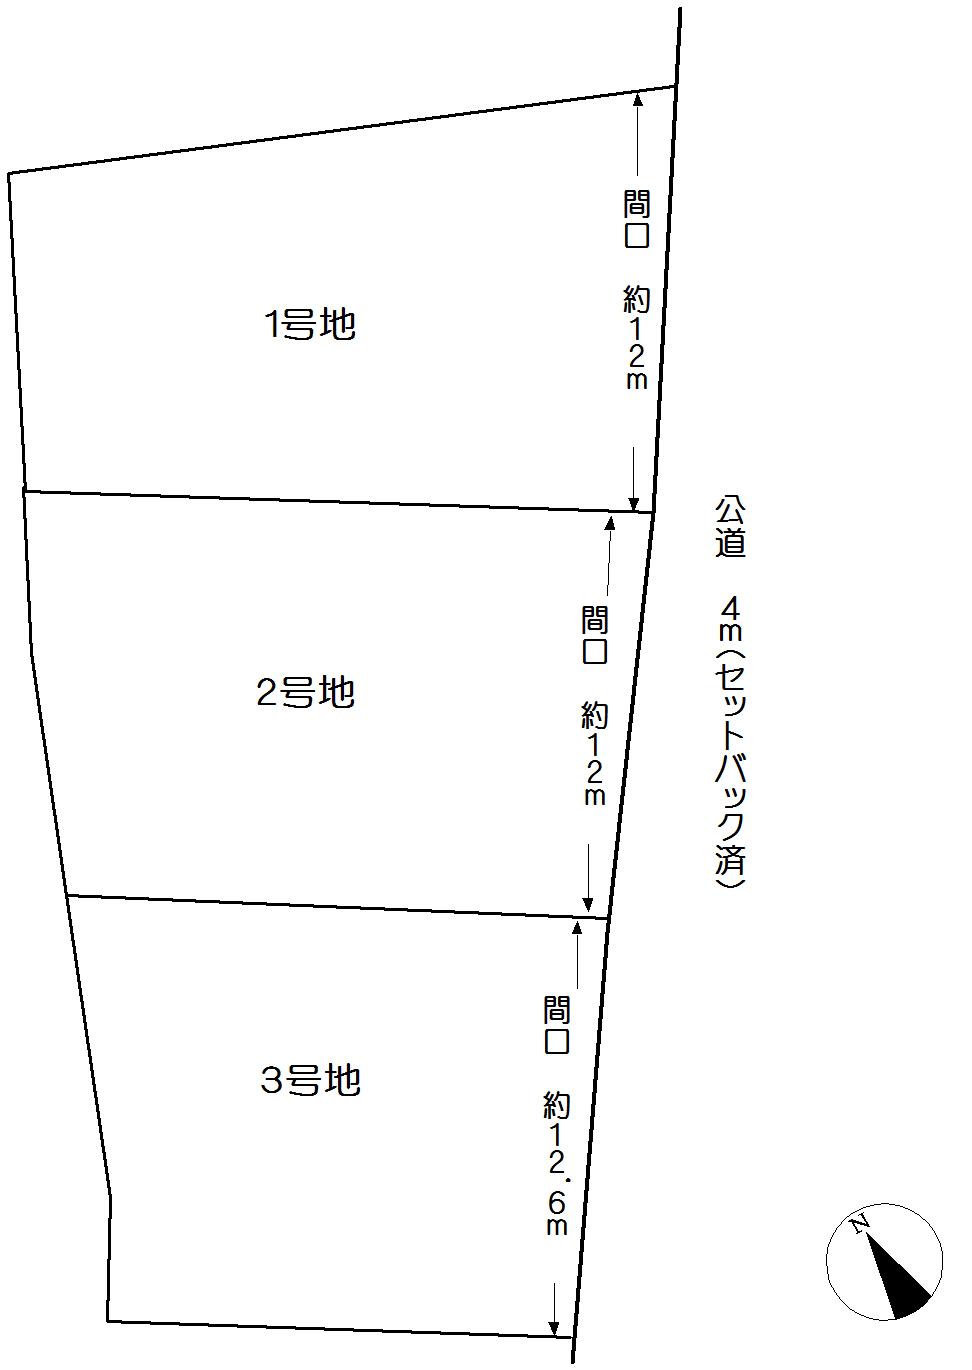 Compartment figure. Land price 10,950,000 yen, Land area 212.3 sq m 1 issue areas